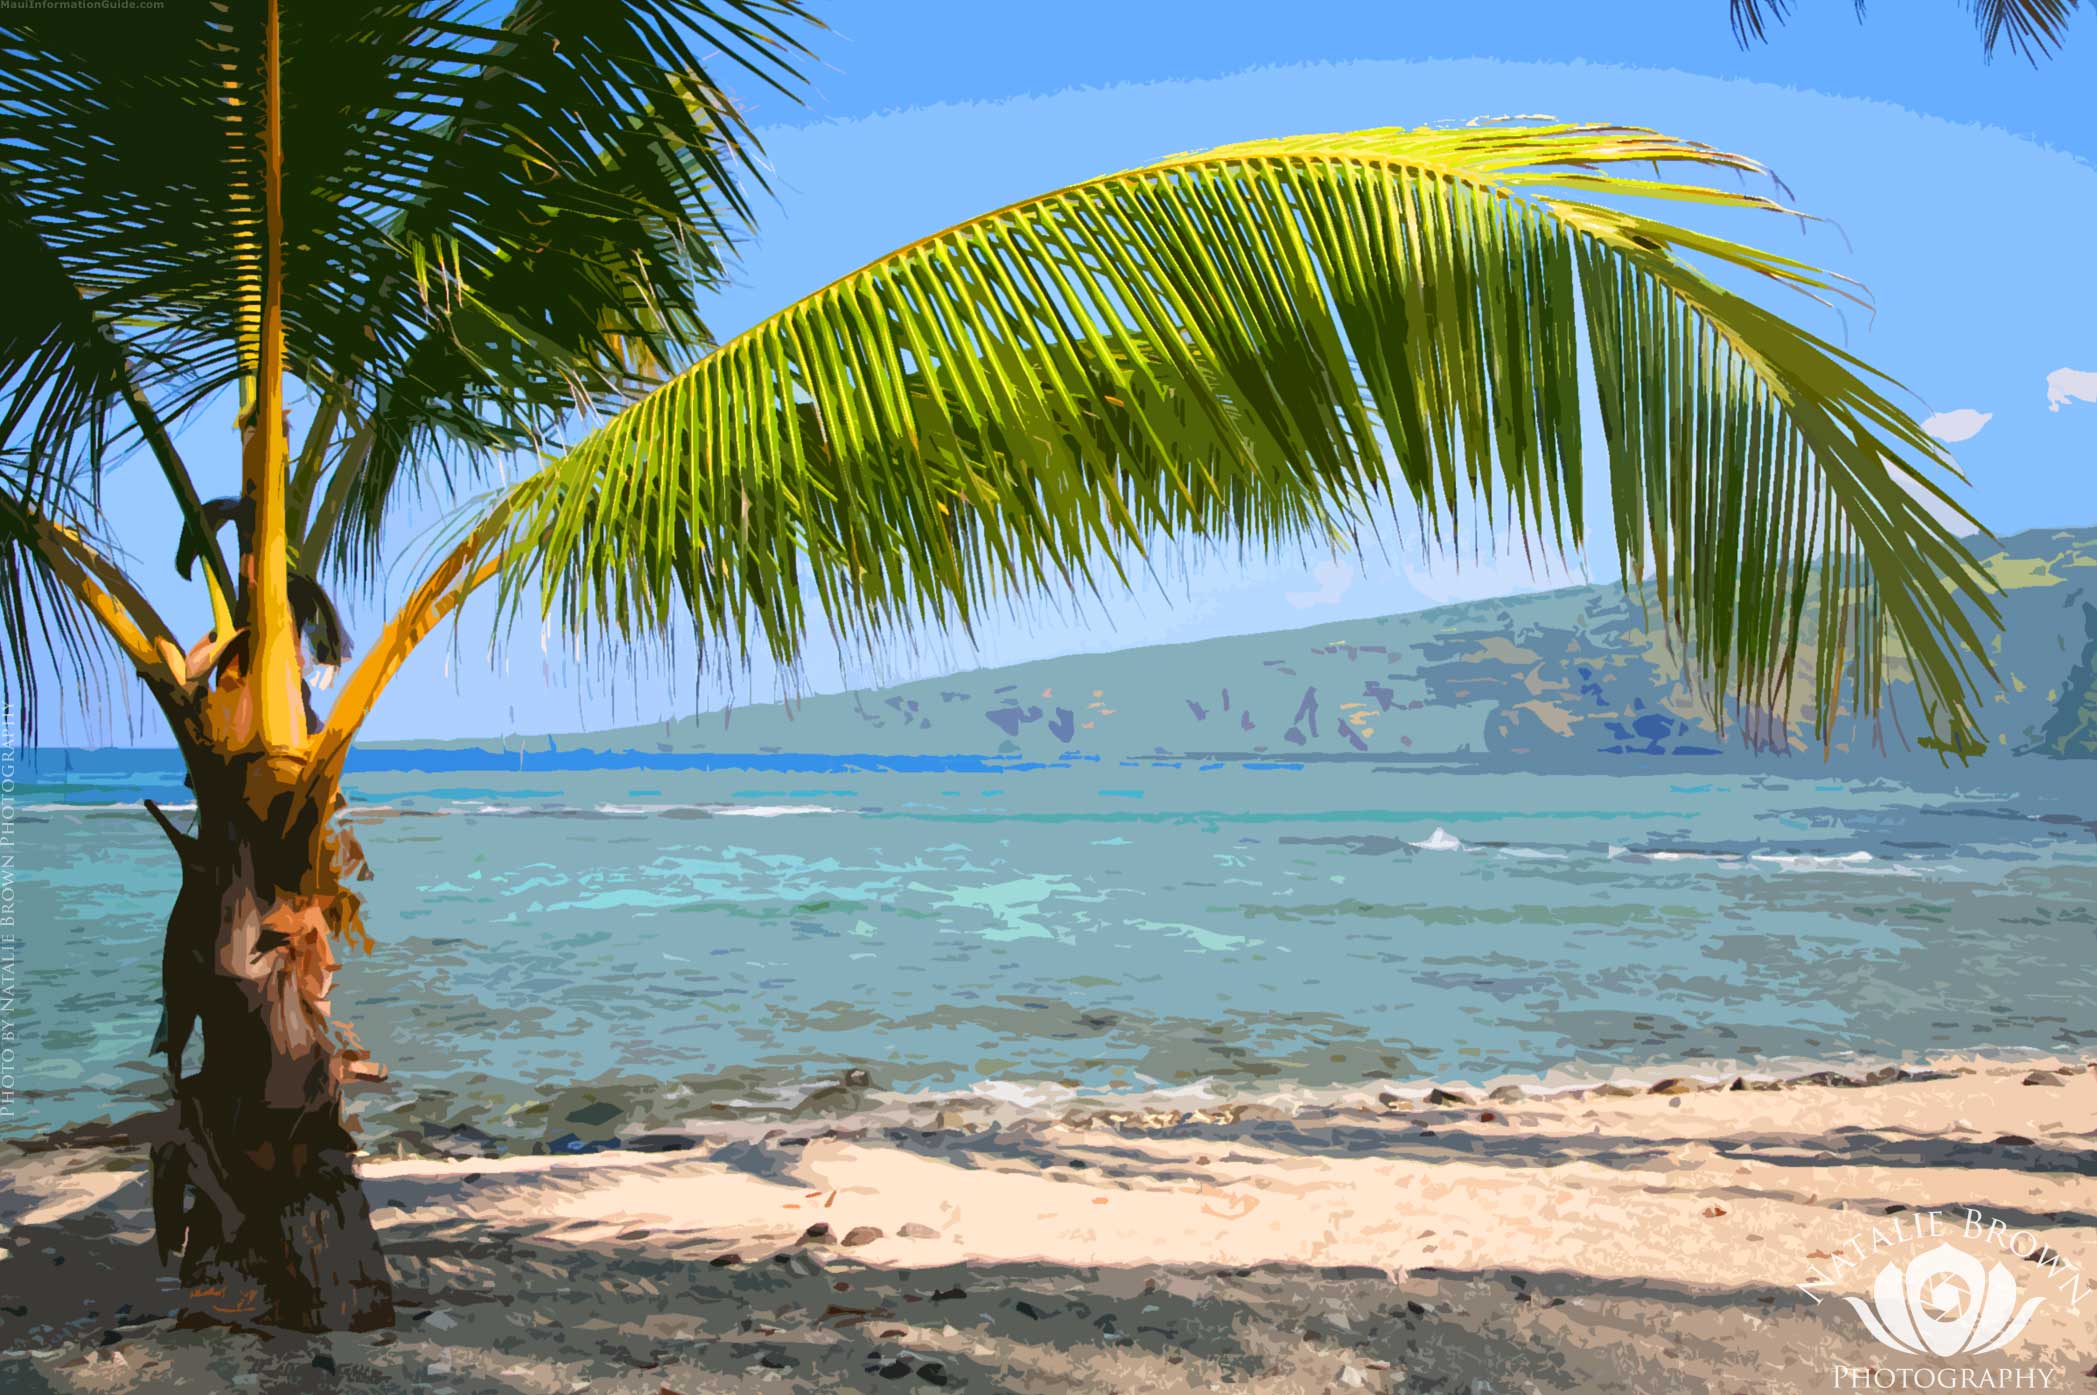 Hawaii Background for Twitter